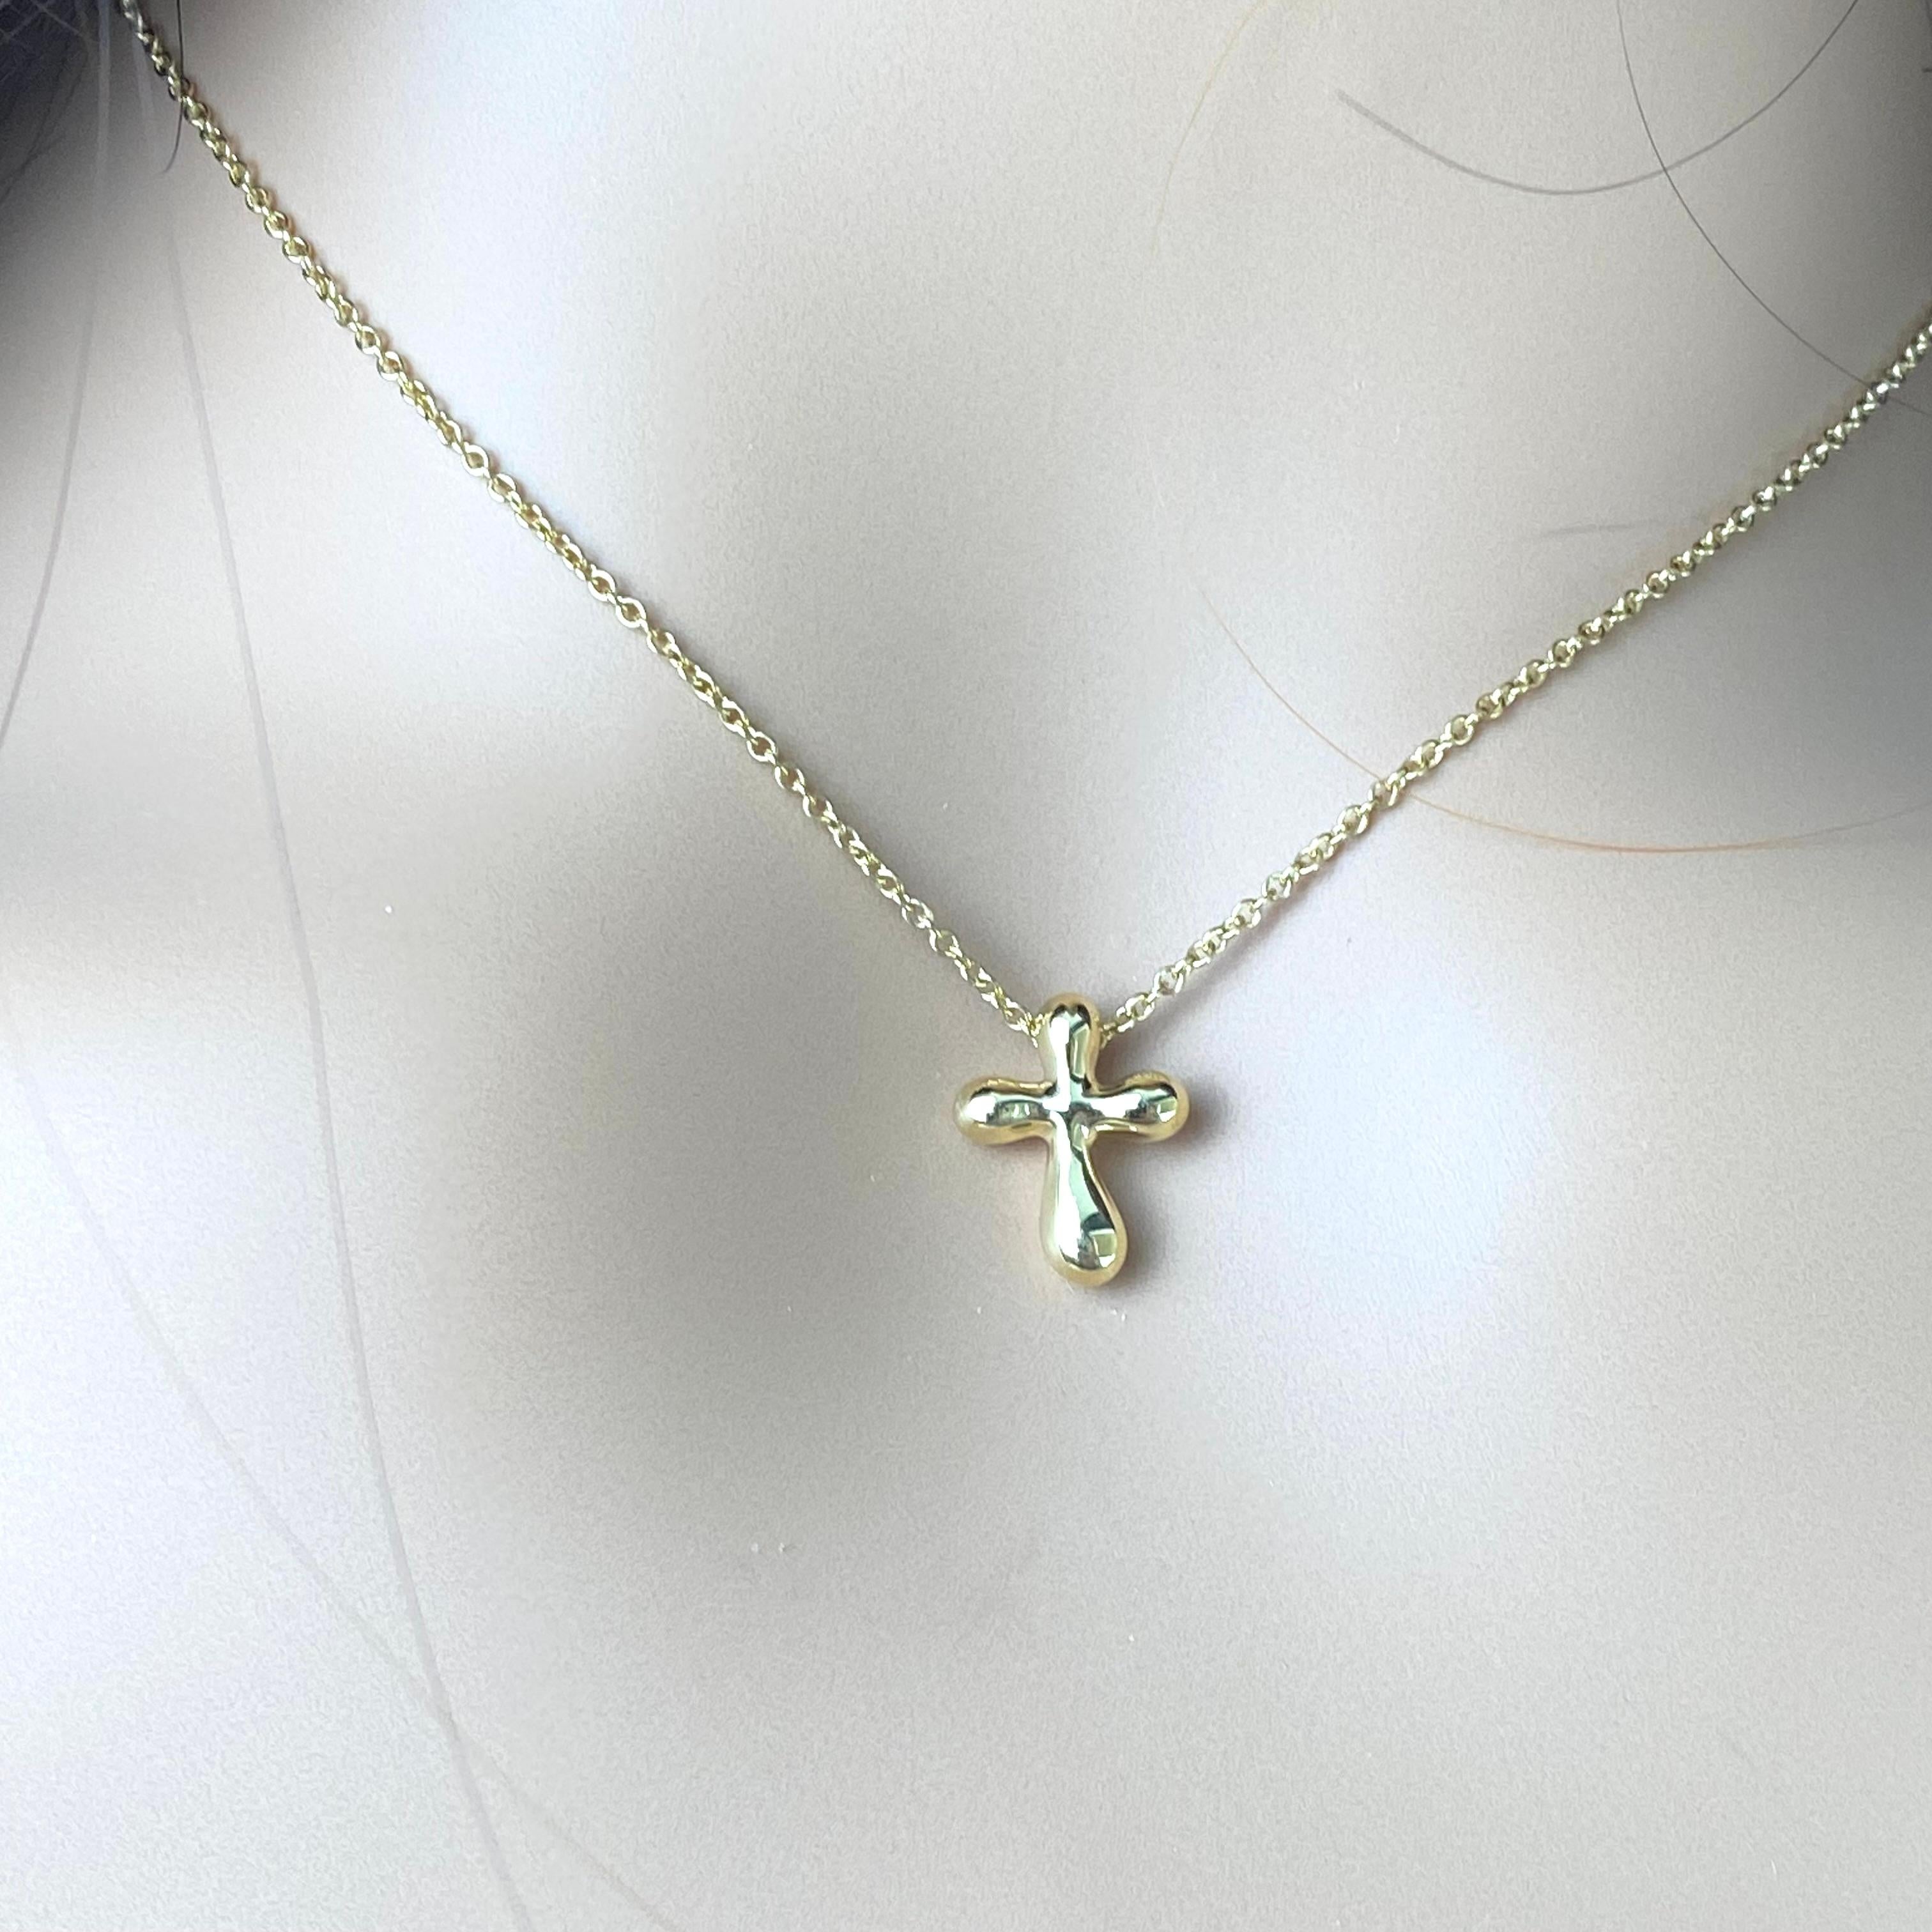 Add a touch of timeless elegance to your ensemble with this exquisite Tiffany & Co Elsa Peretti Cross Pendant Necklace. Crafted from luxurious 18 karat yellow gold, this necklace is a symbol of both faith and sophistication.
The pendant features a